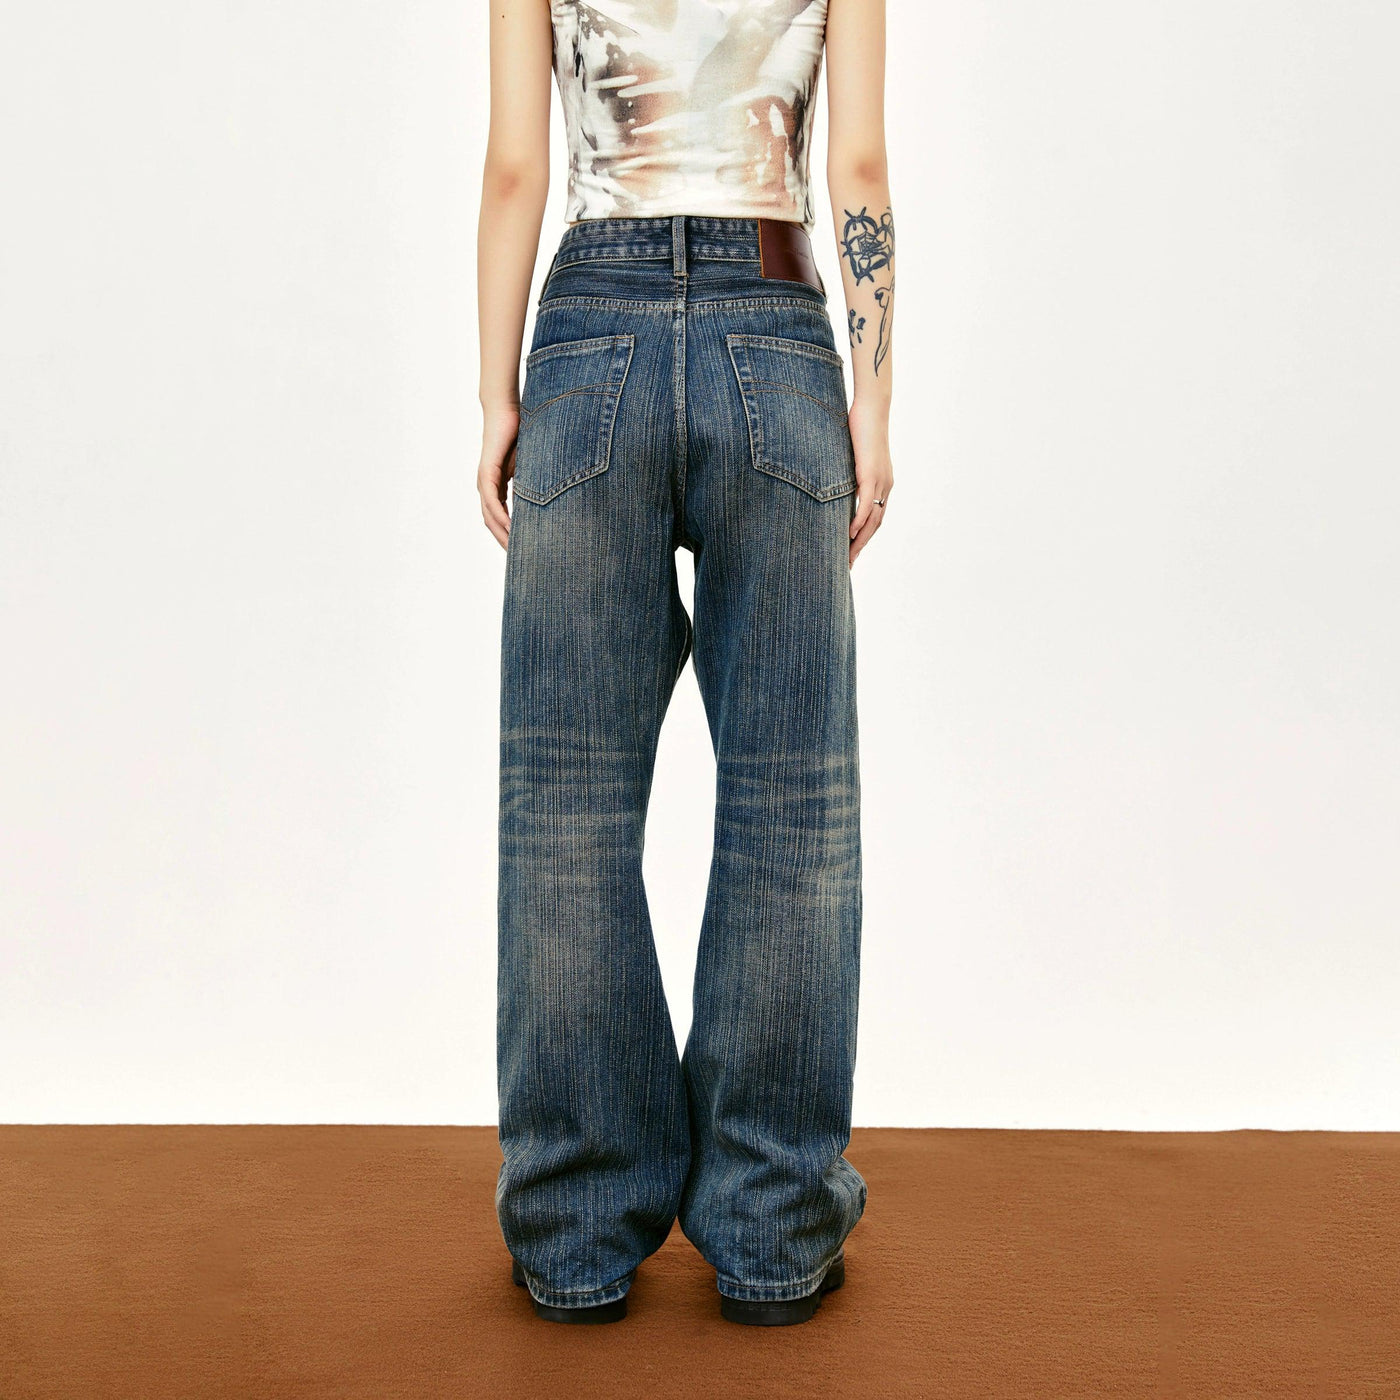 Classic Washed & Whisker Flare Leg Jeans Korean Street Fashion Jeans By Made Extreme Shop Online at OH Vault